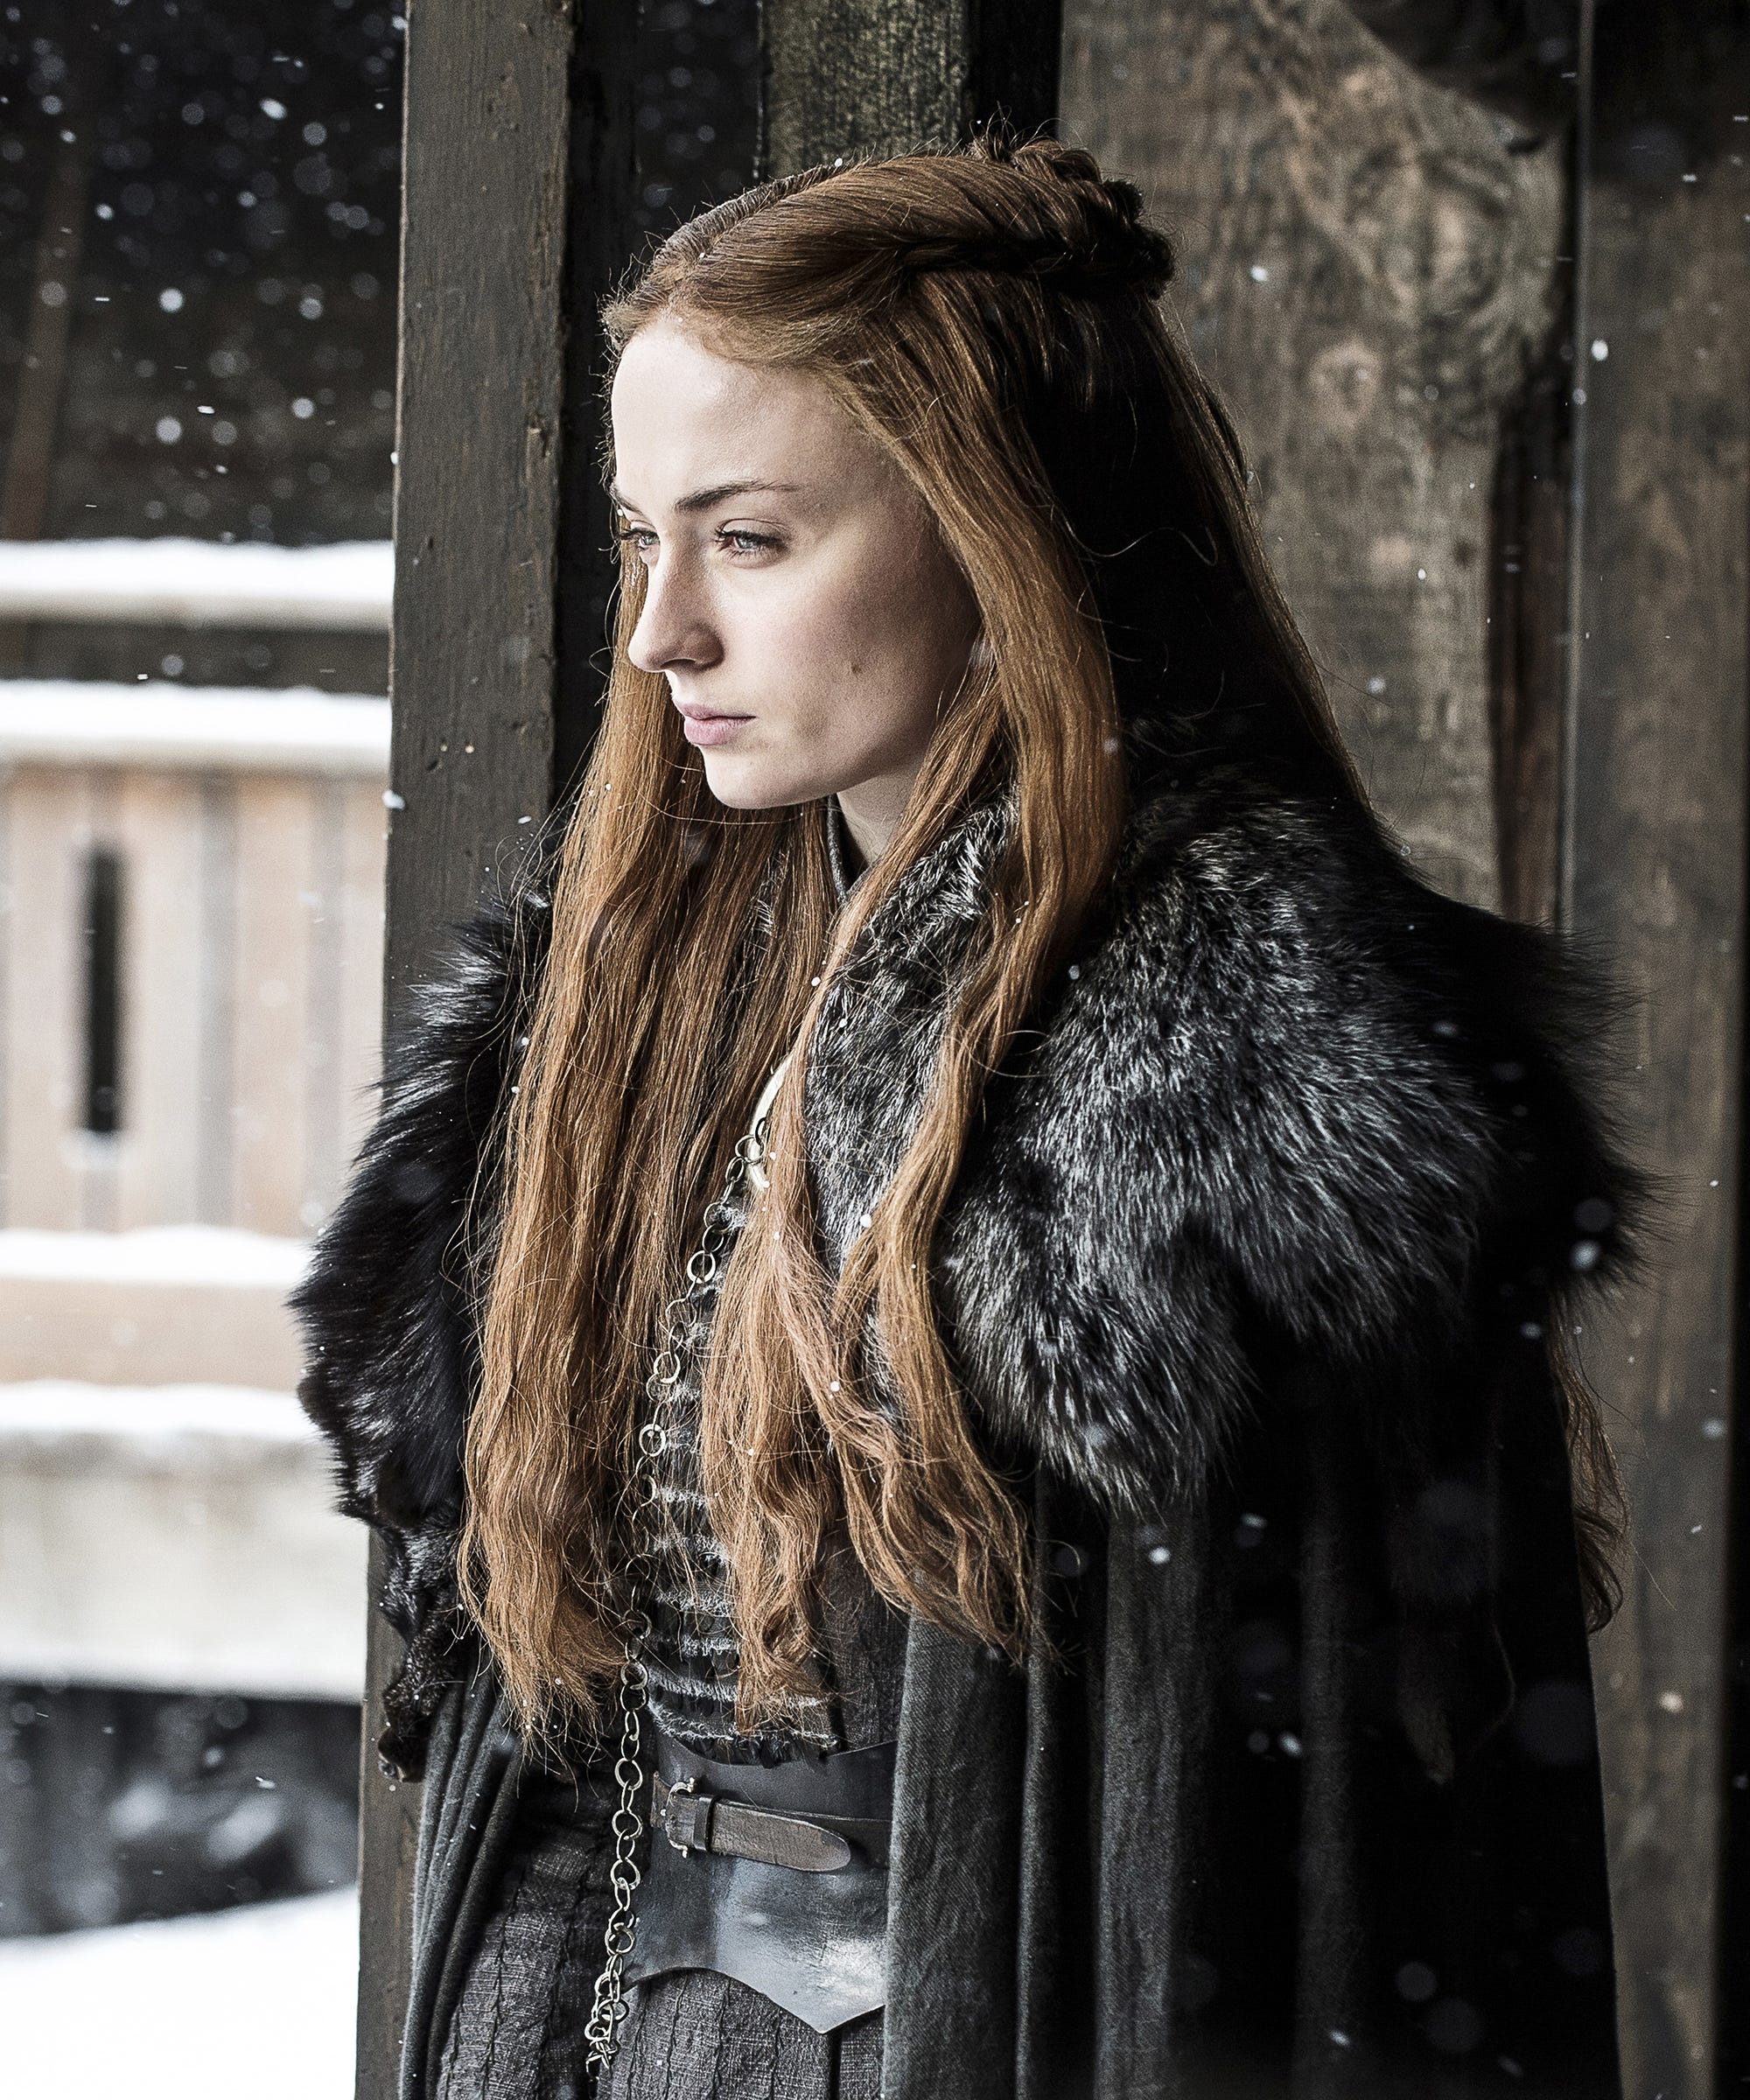 angel mesina recommends redhead game of thrones pic